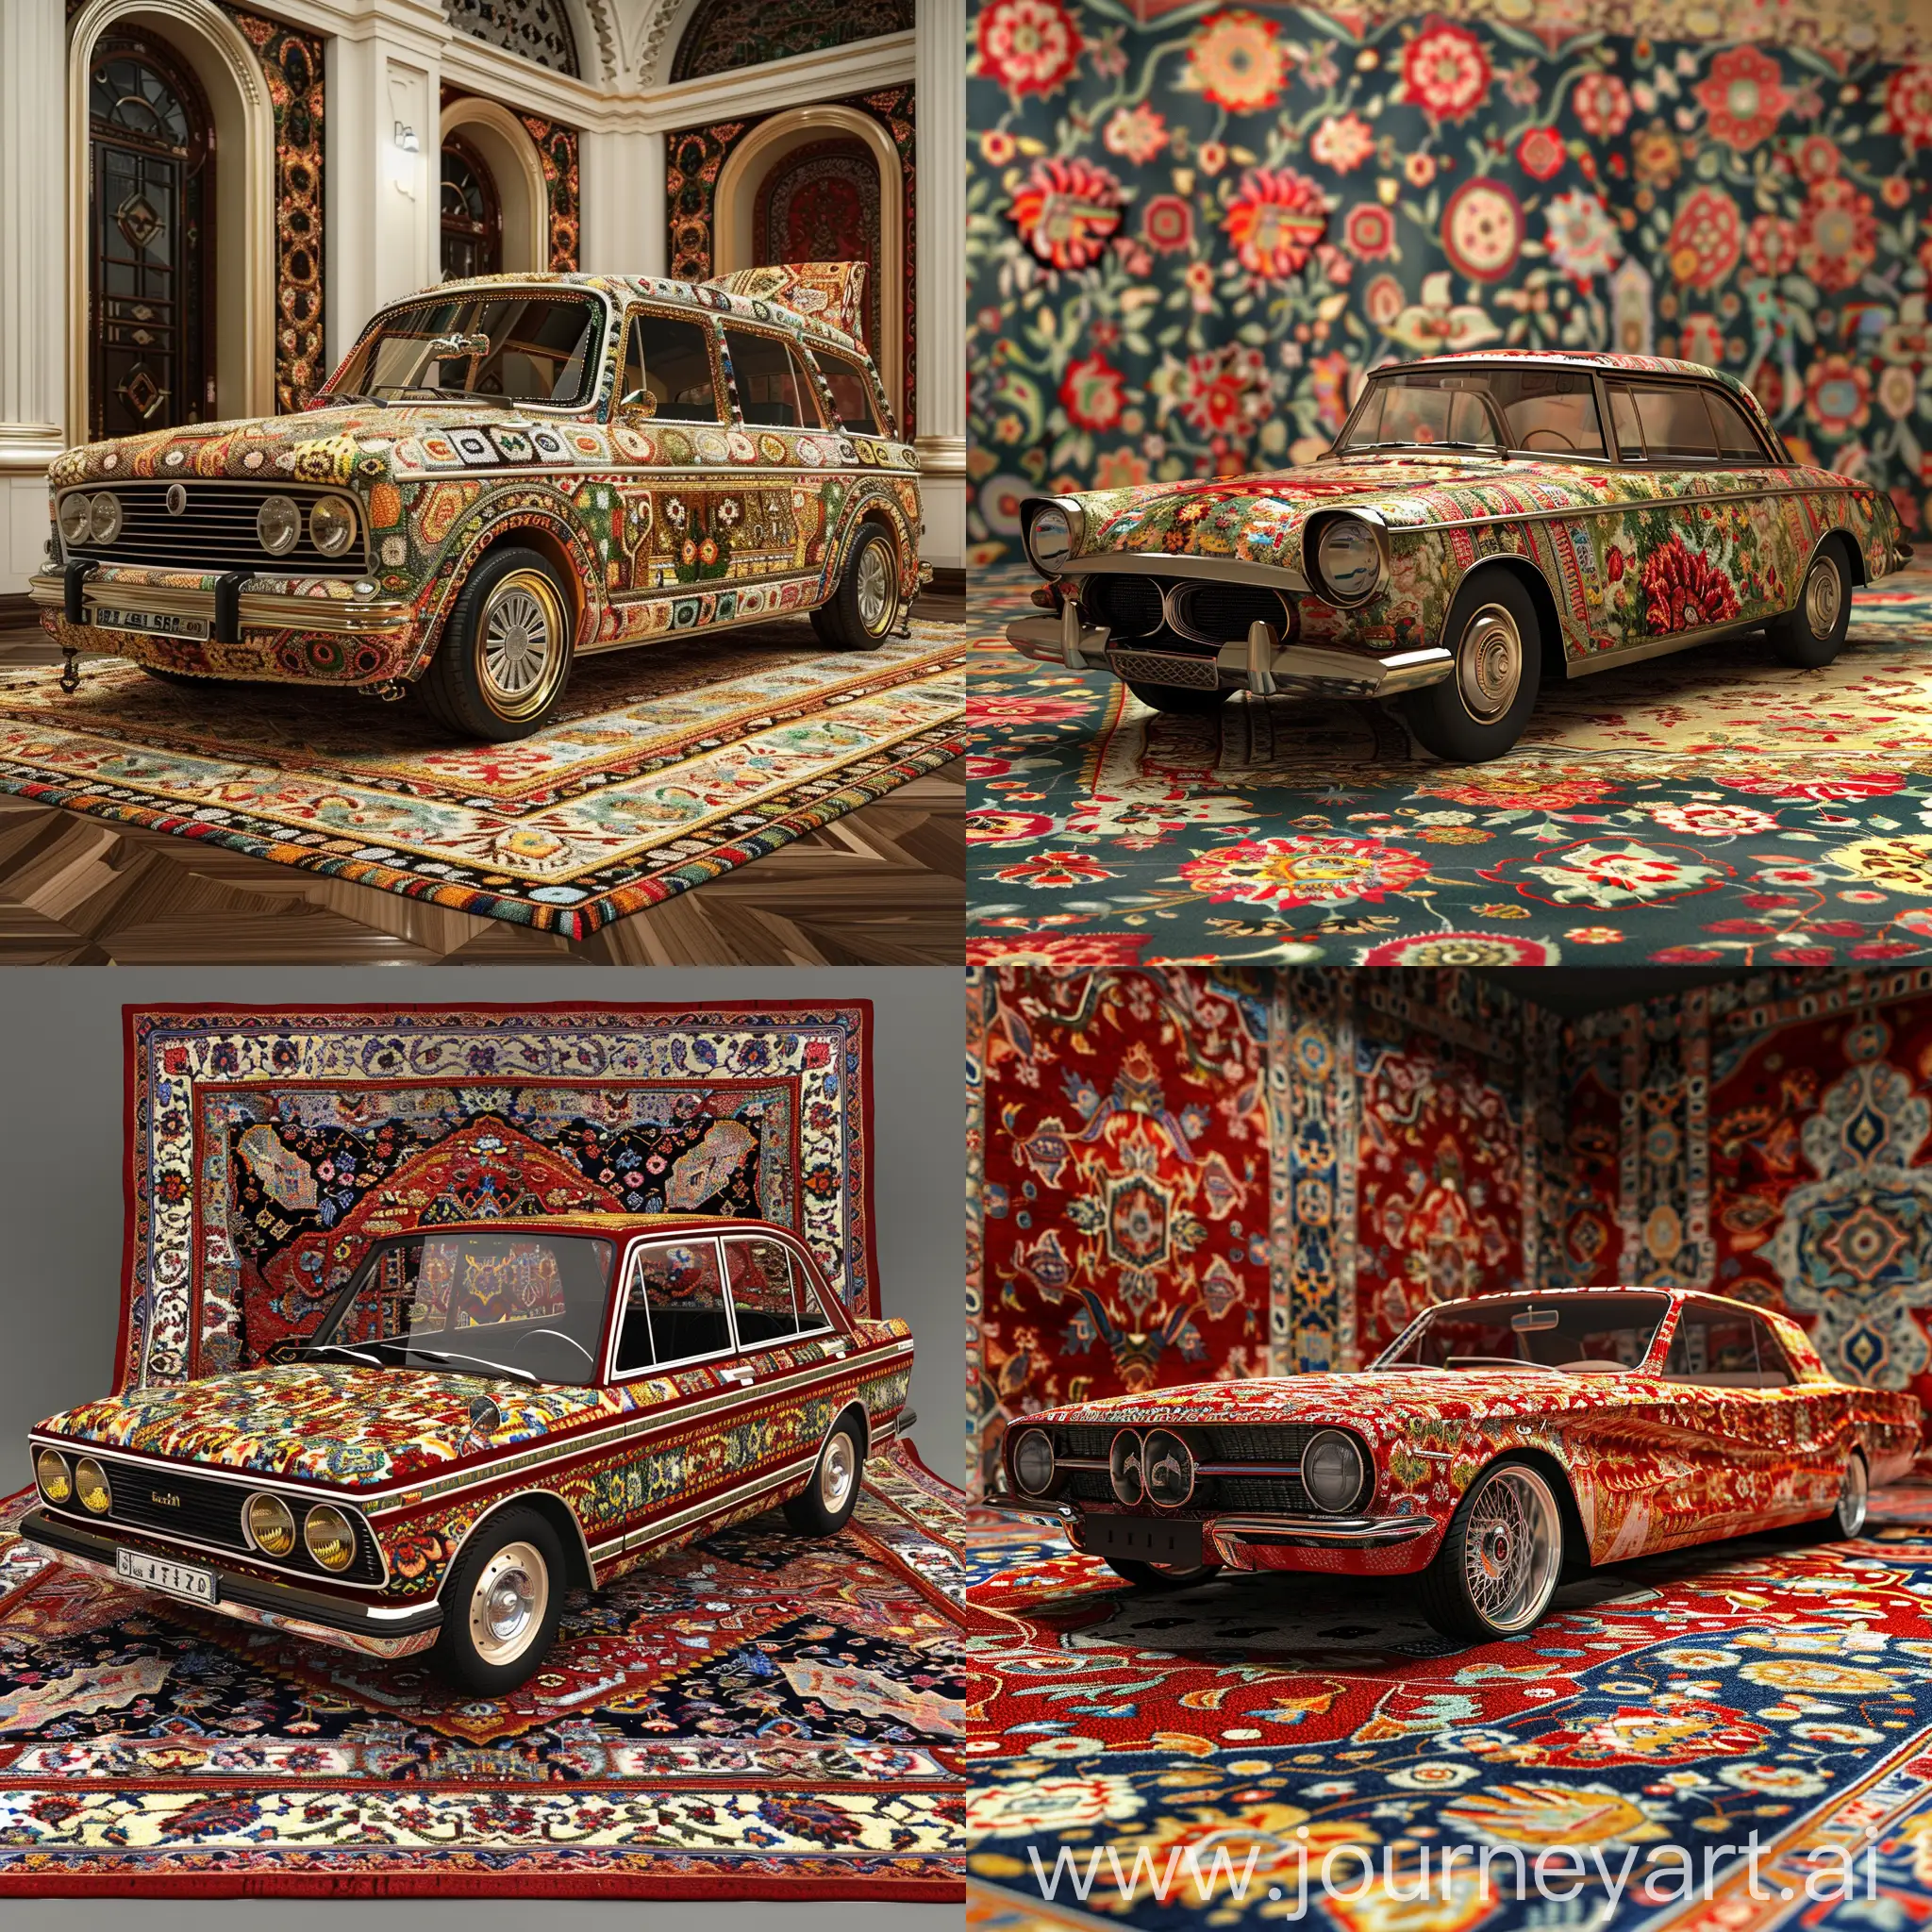 Design the smand from irankhodro  car with Iranian carpet designs in a completely natural way, the background should be Iranian carpet, very realistic, 3d, exhibition angle, there should be a design of Iranian carpet on the car and match the background